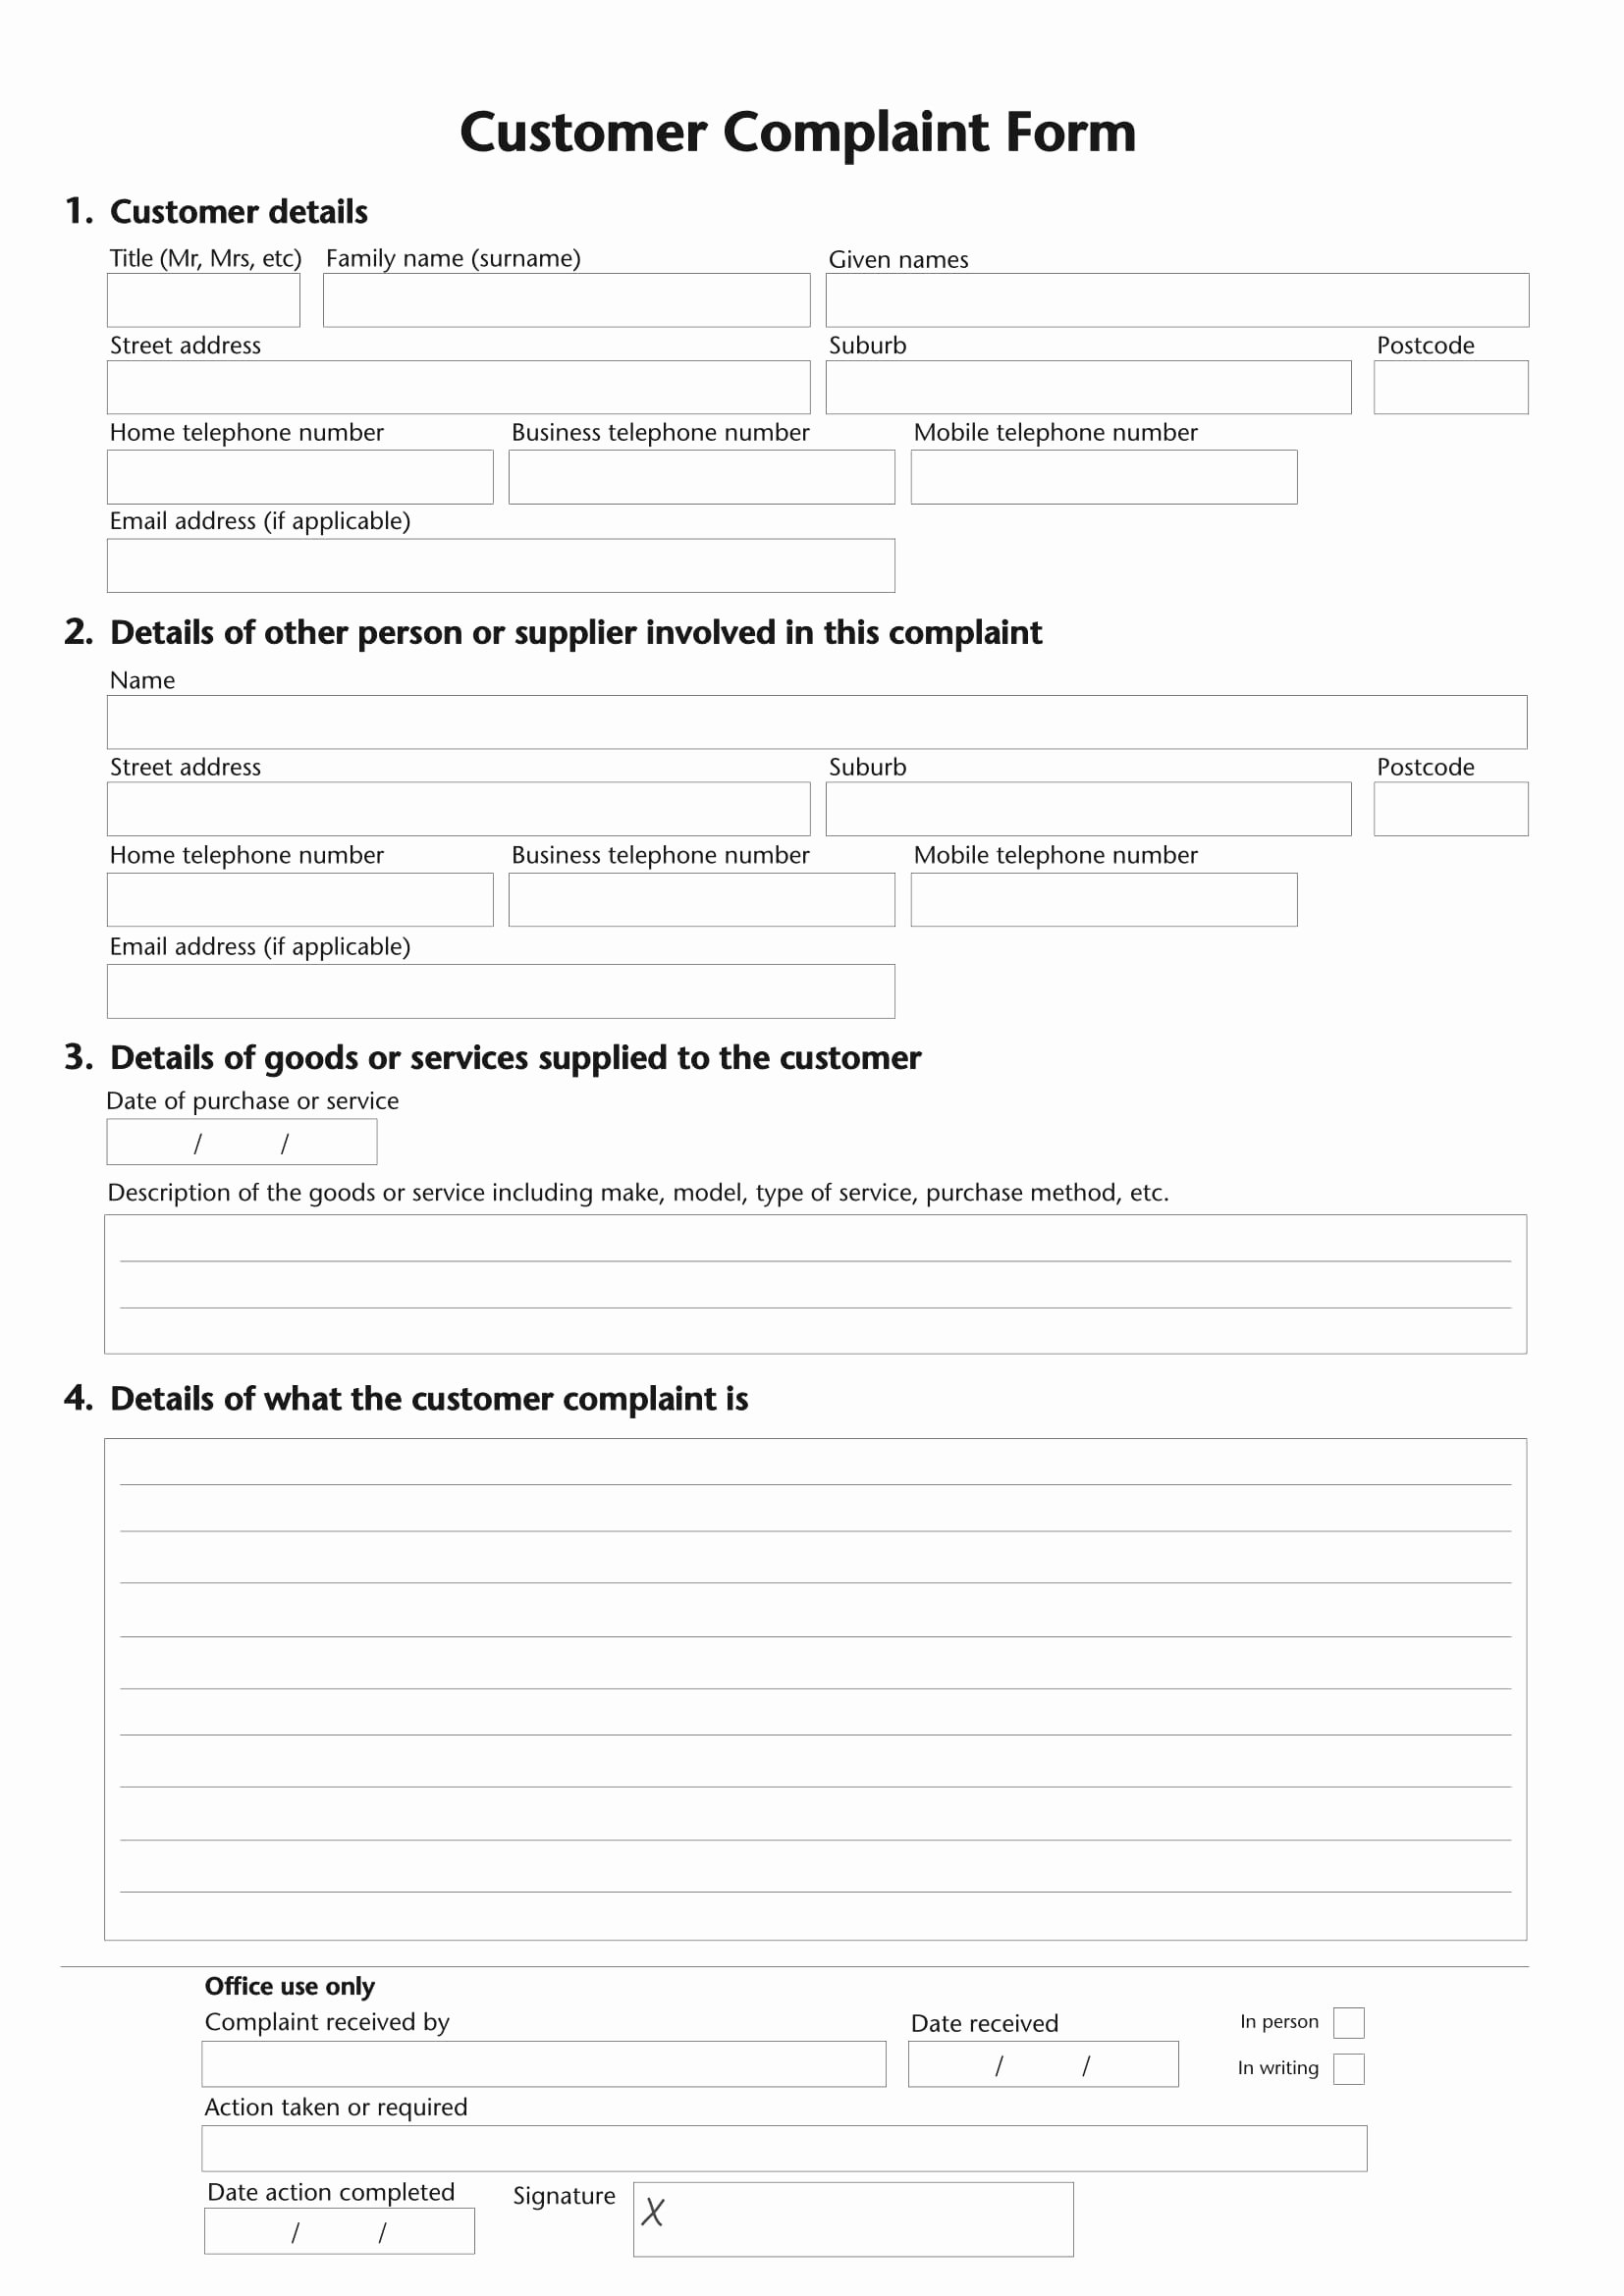 Customer Complaint form Template Best Of Free 4 Customer Plaint forms In Pdf